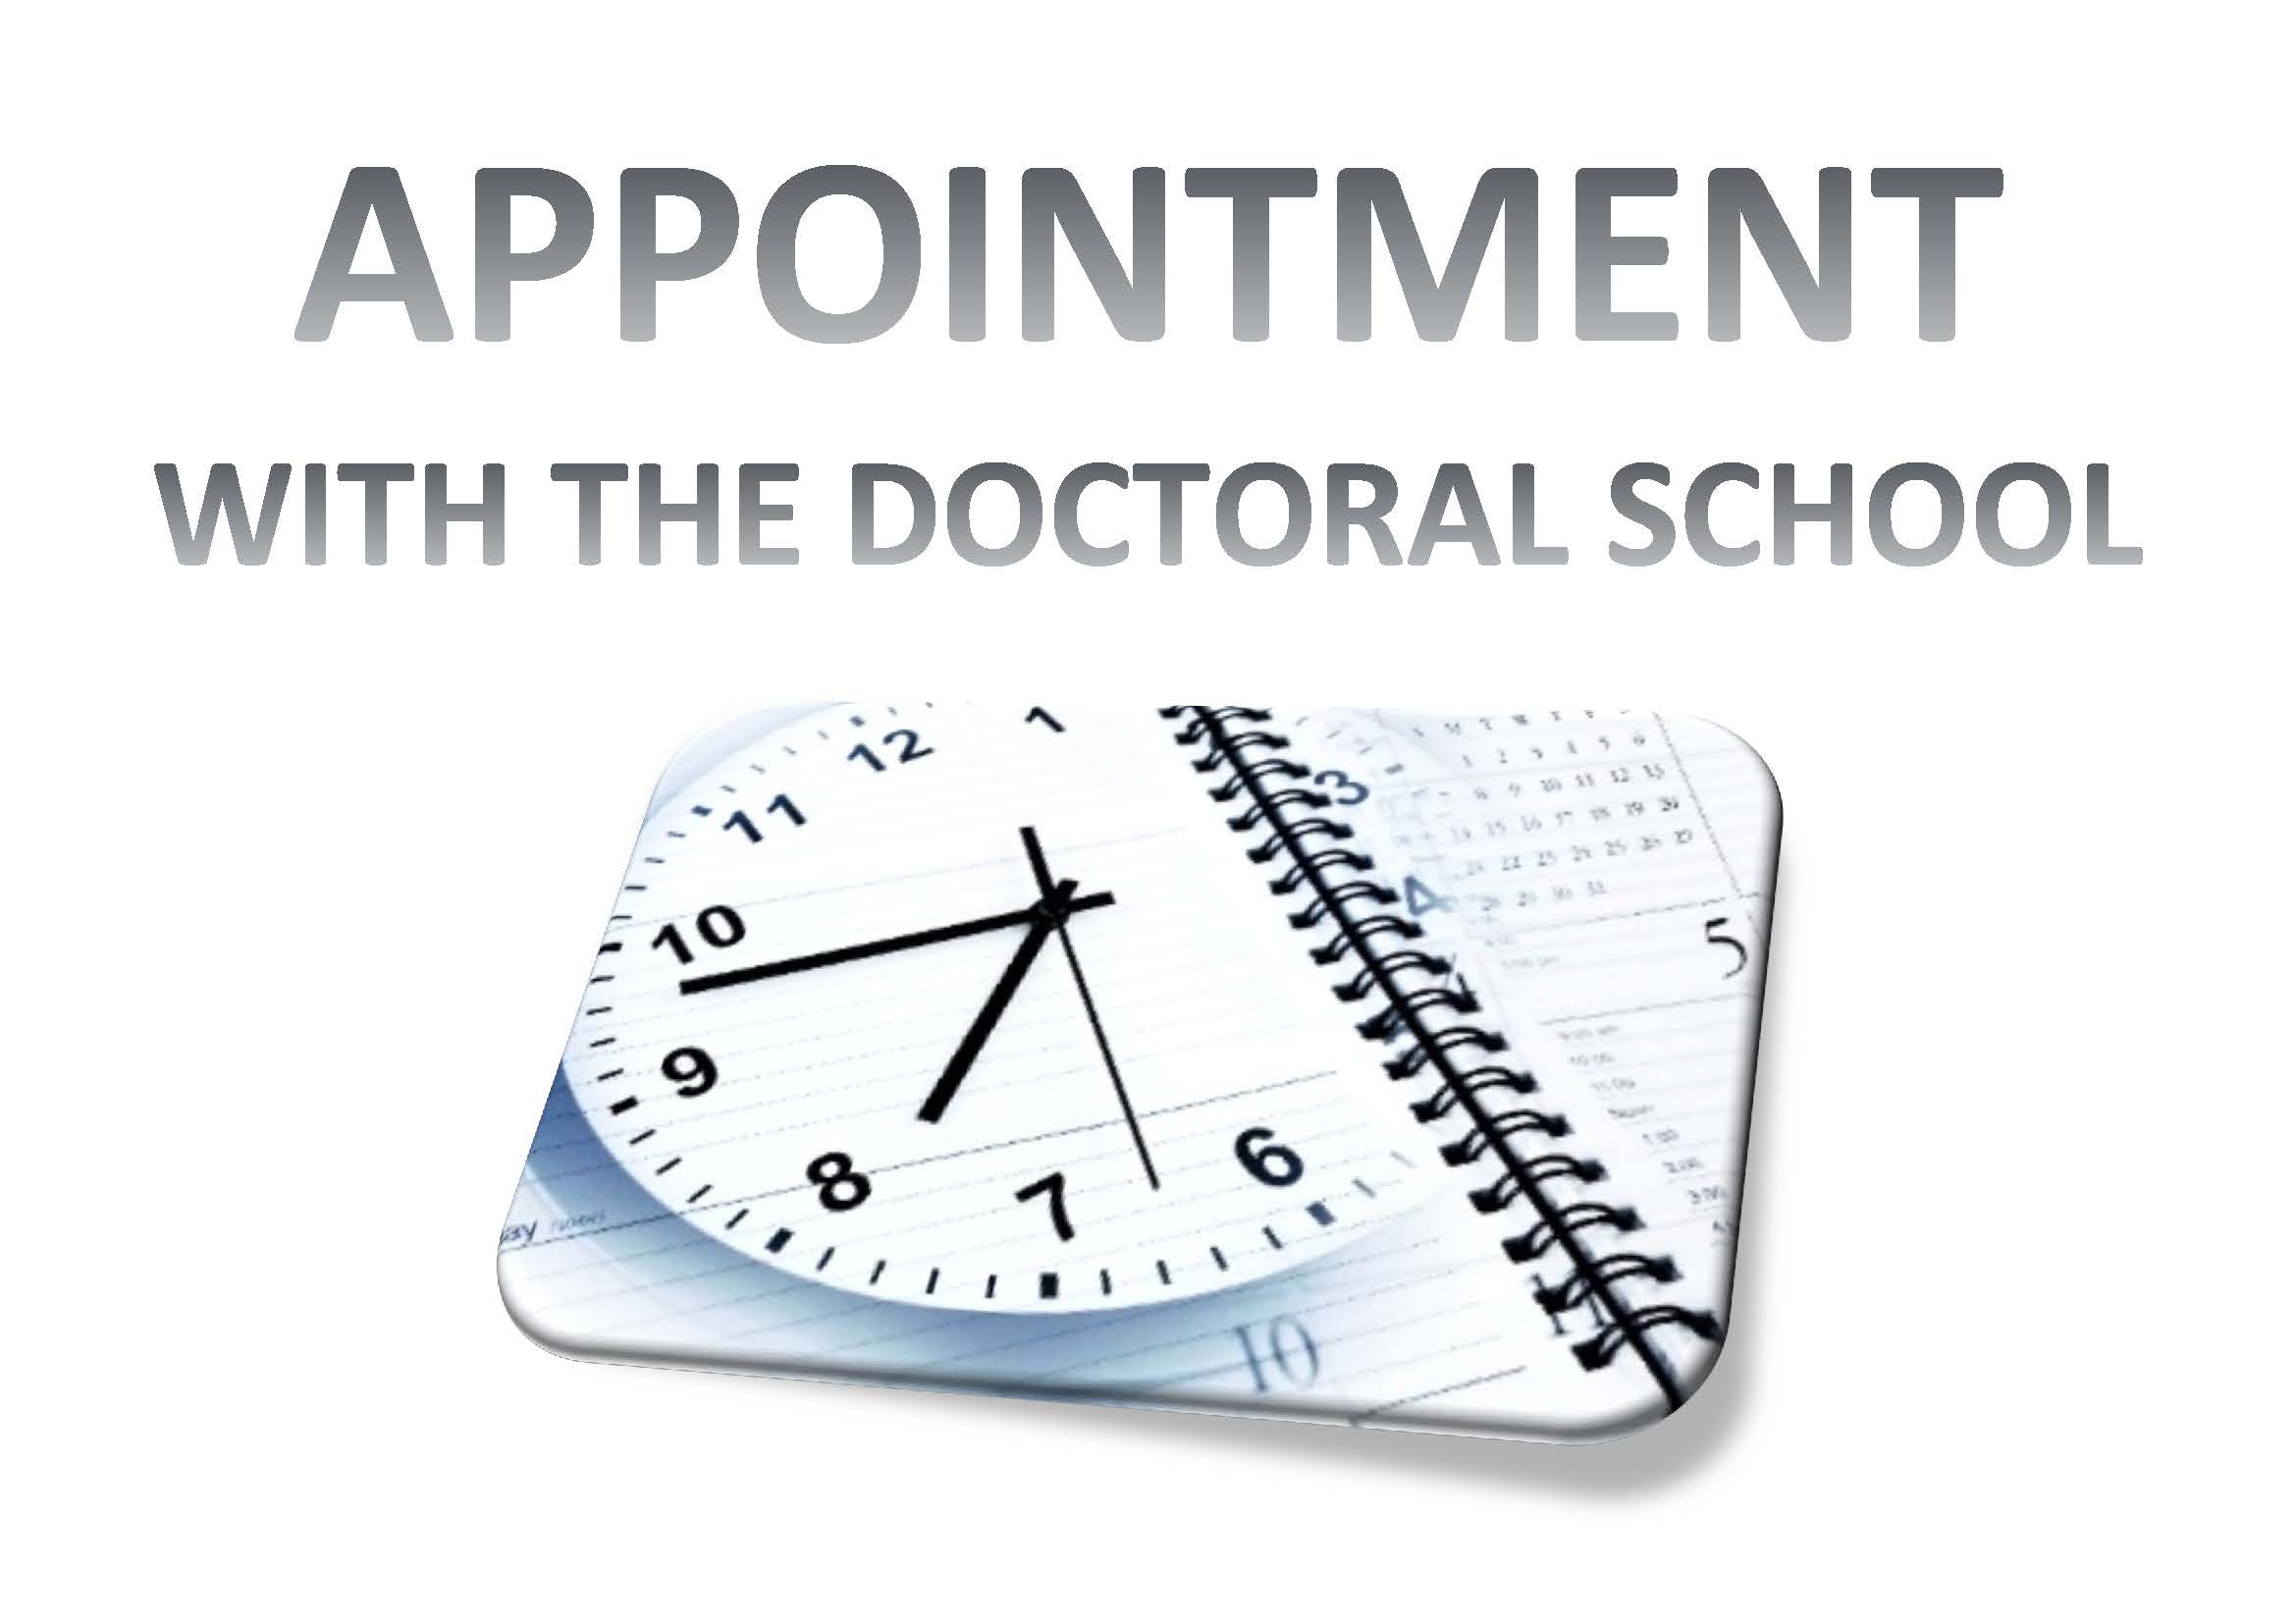 Appointment with the Doctoral School